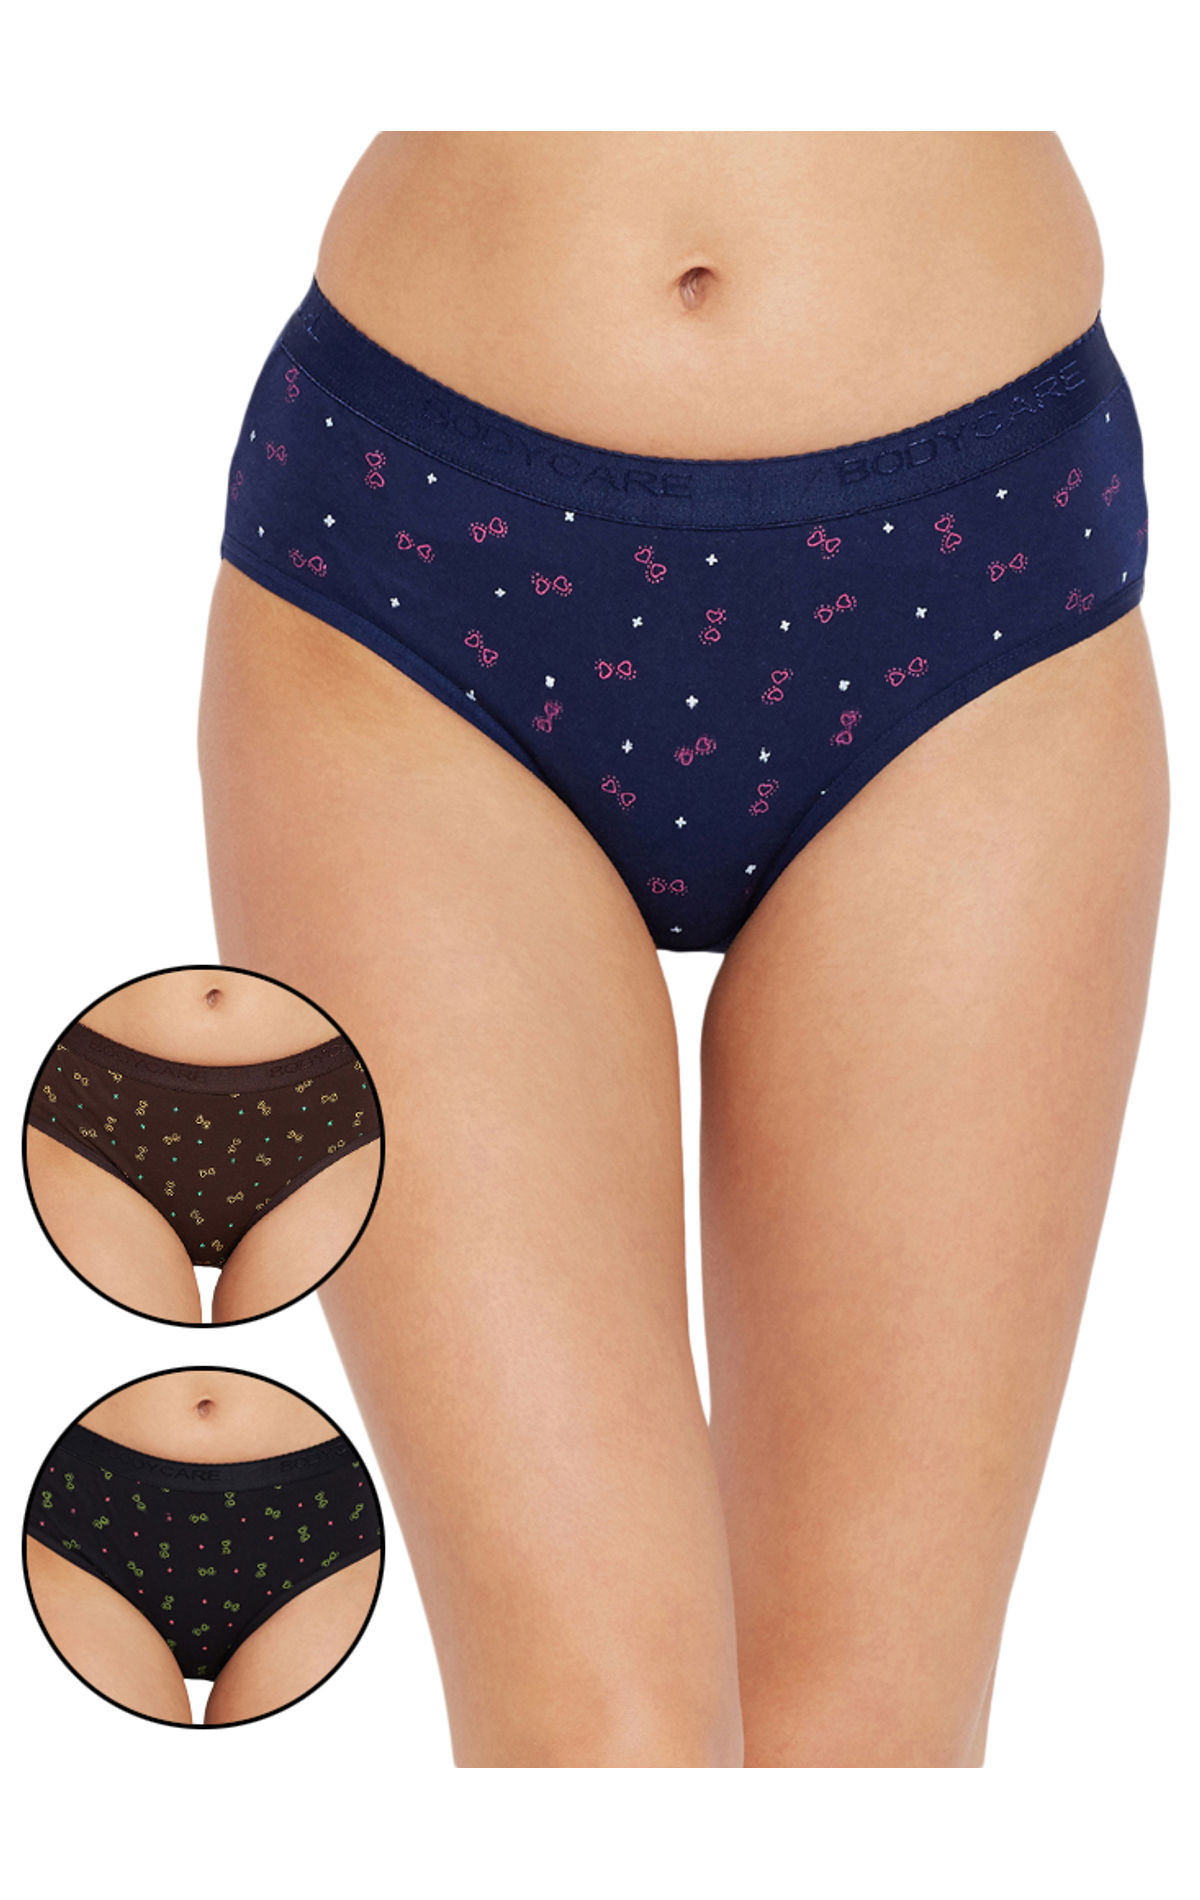 Buy Bodycare Women's Floral Hipster Panty (pack Of 6) - Multi